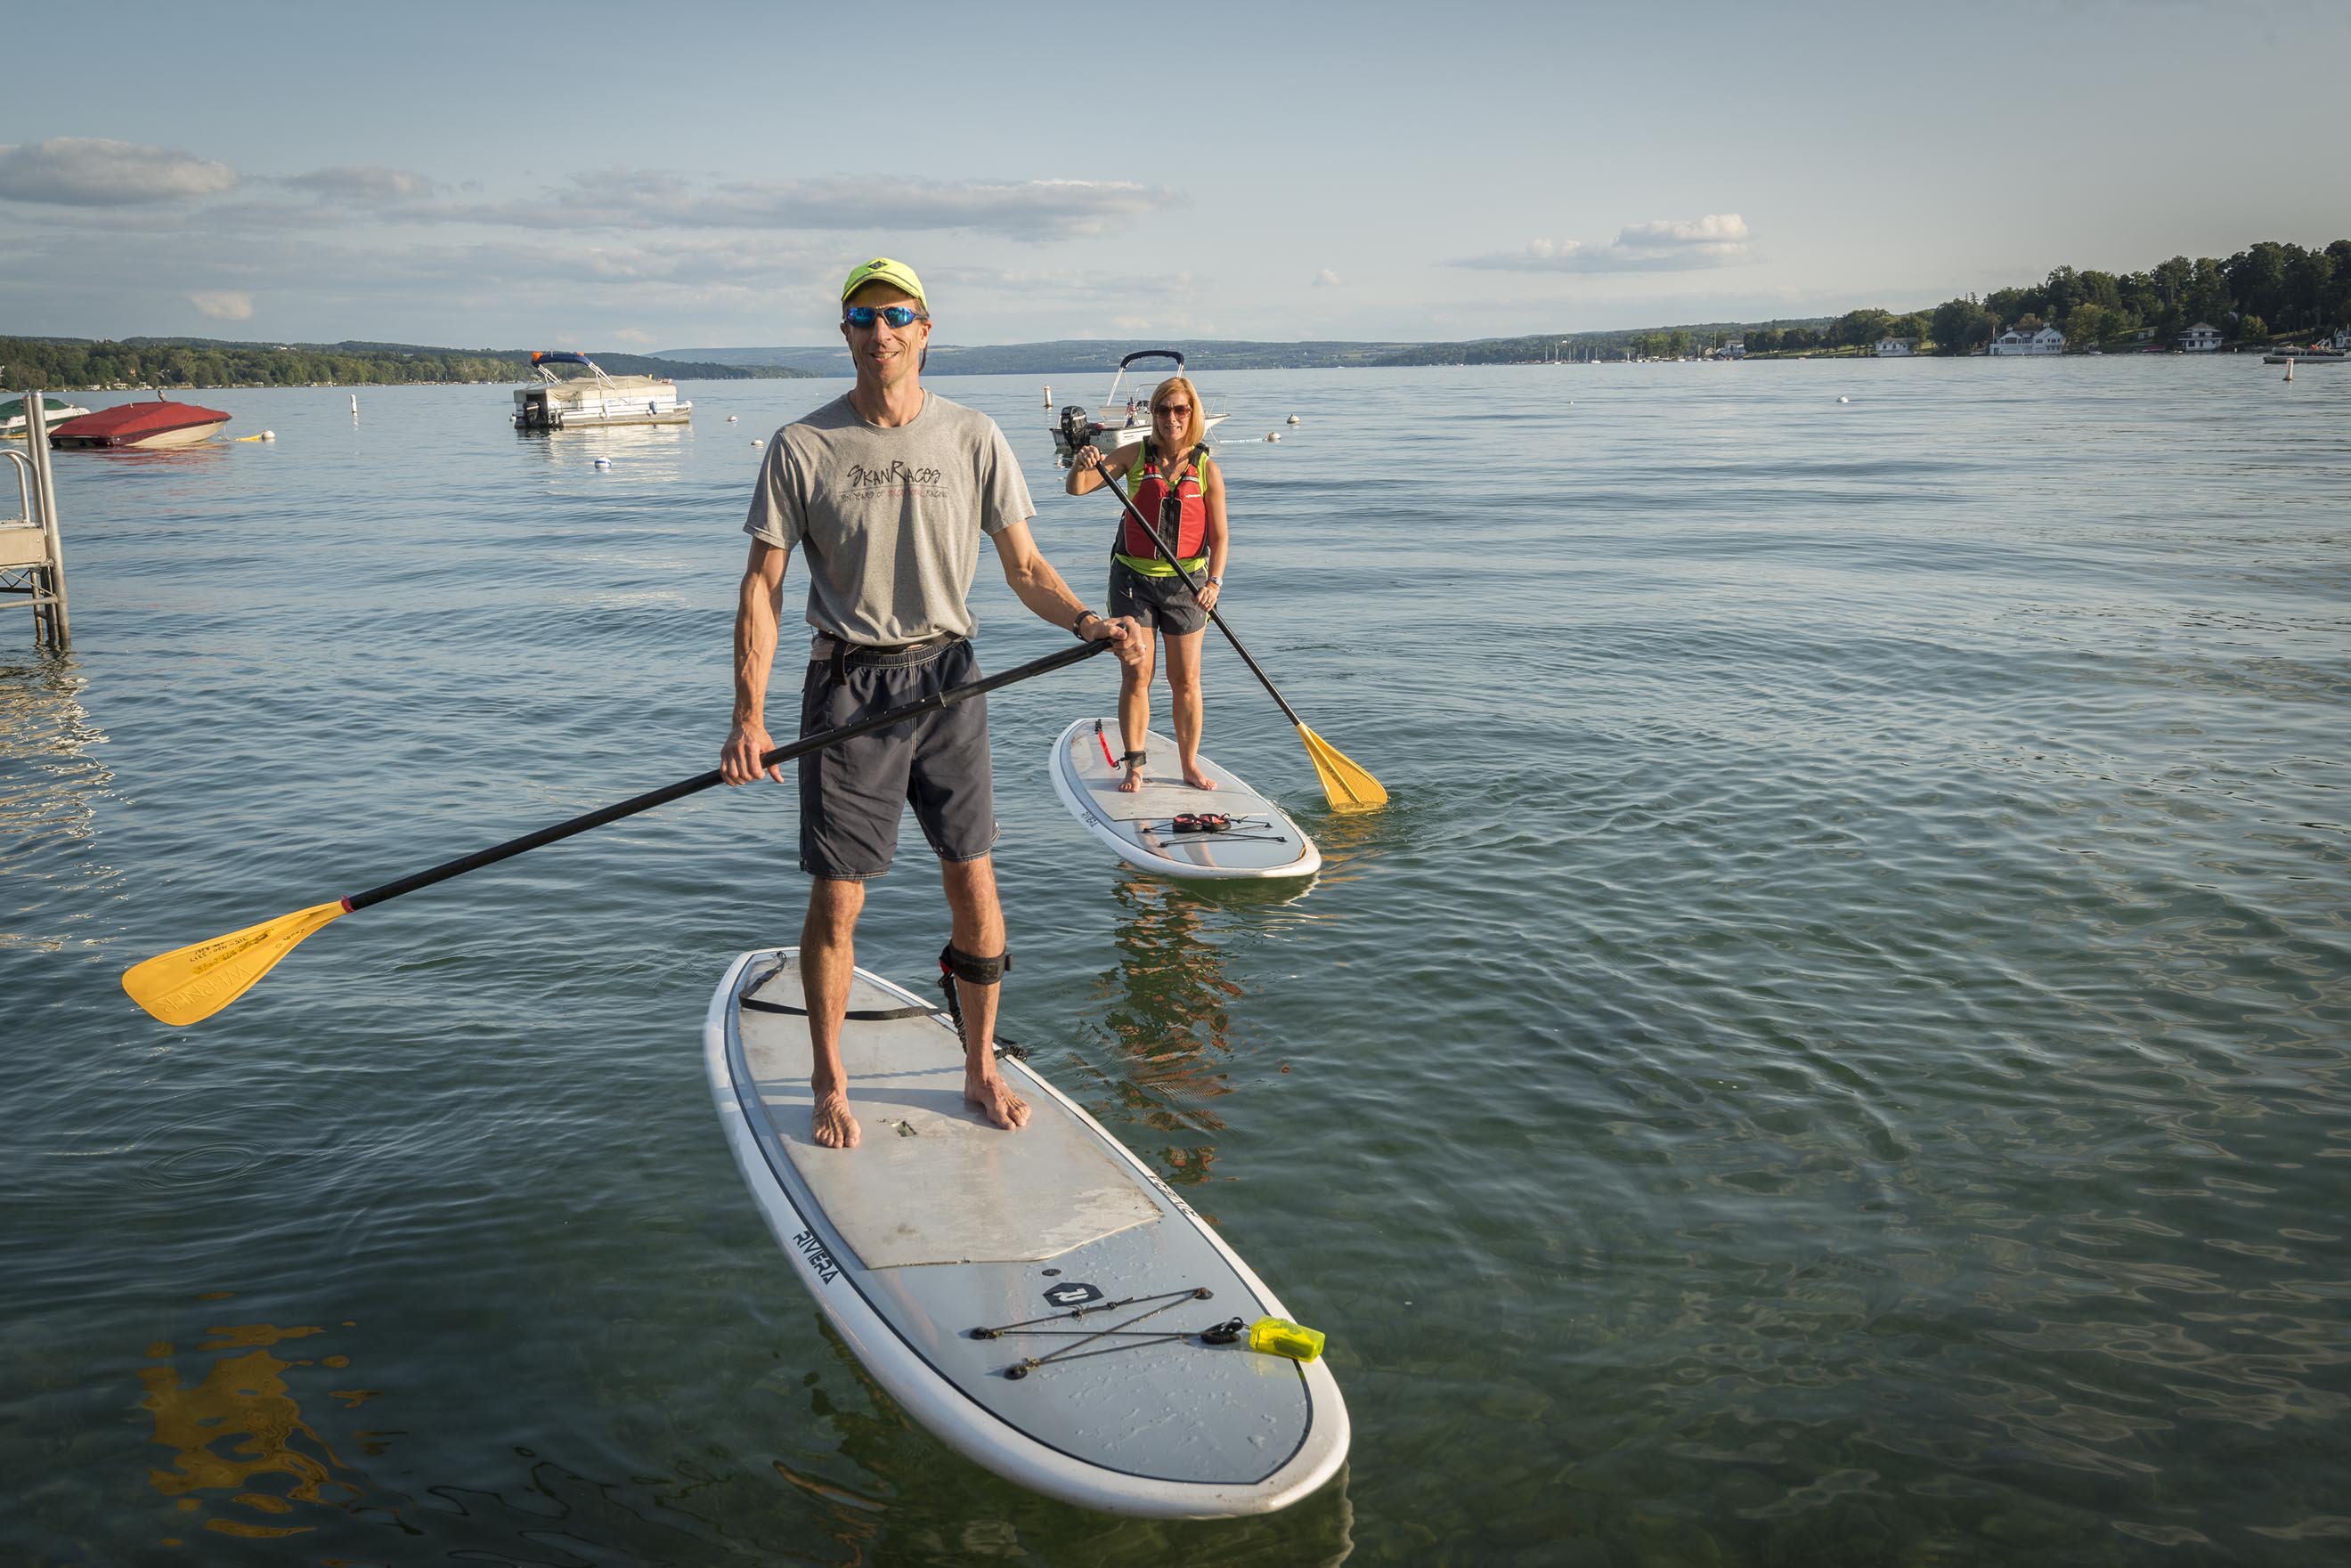 Kevin and Martha O'Keefe, who are both nurses at Upstate University Hospital, can often be found on paddleboards in Skaneateles Lake in the summertime. Their two young children like to come along, too. (PHOTO BY ROBERT MESCAVAGE)